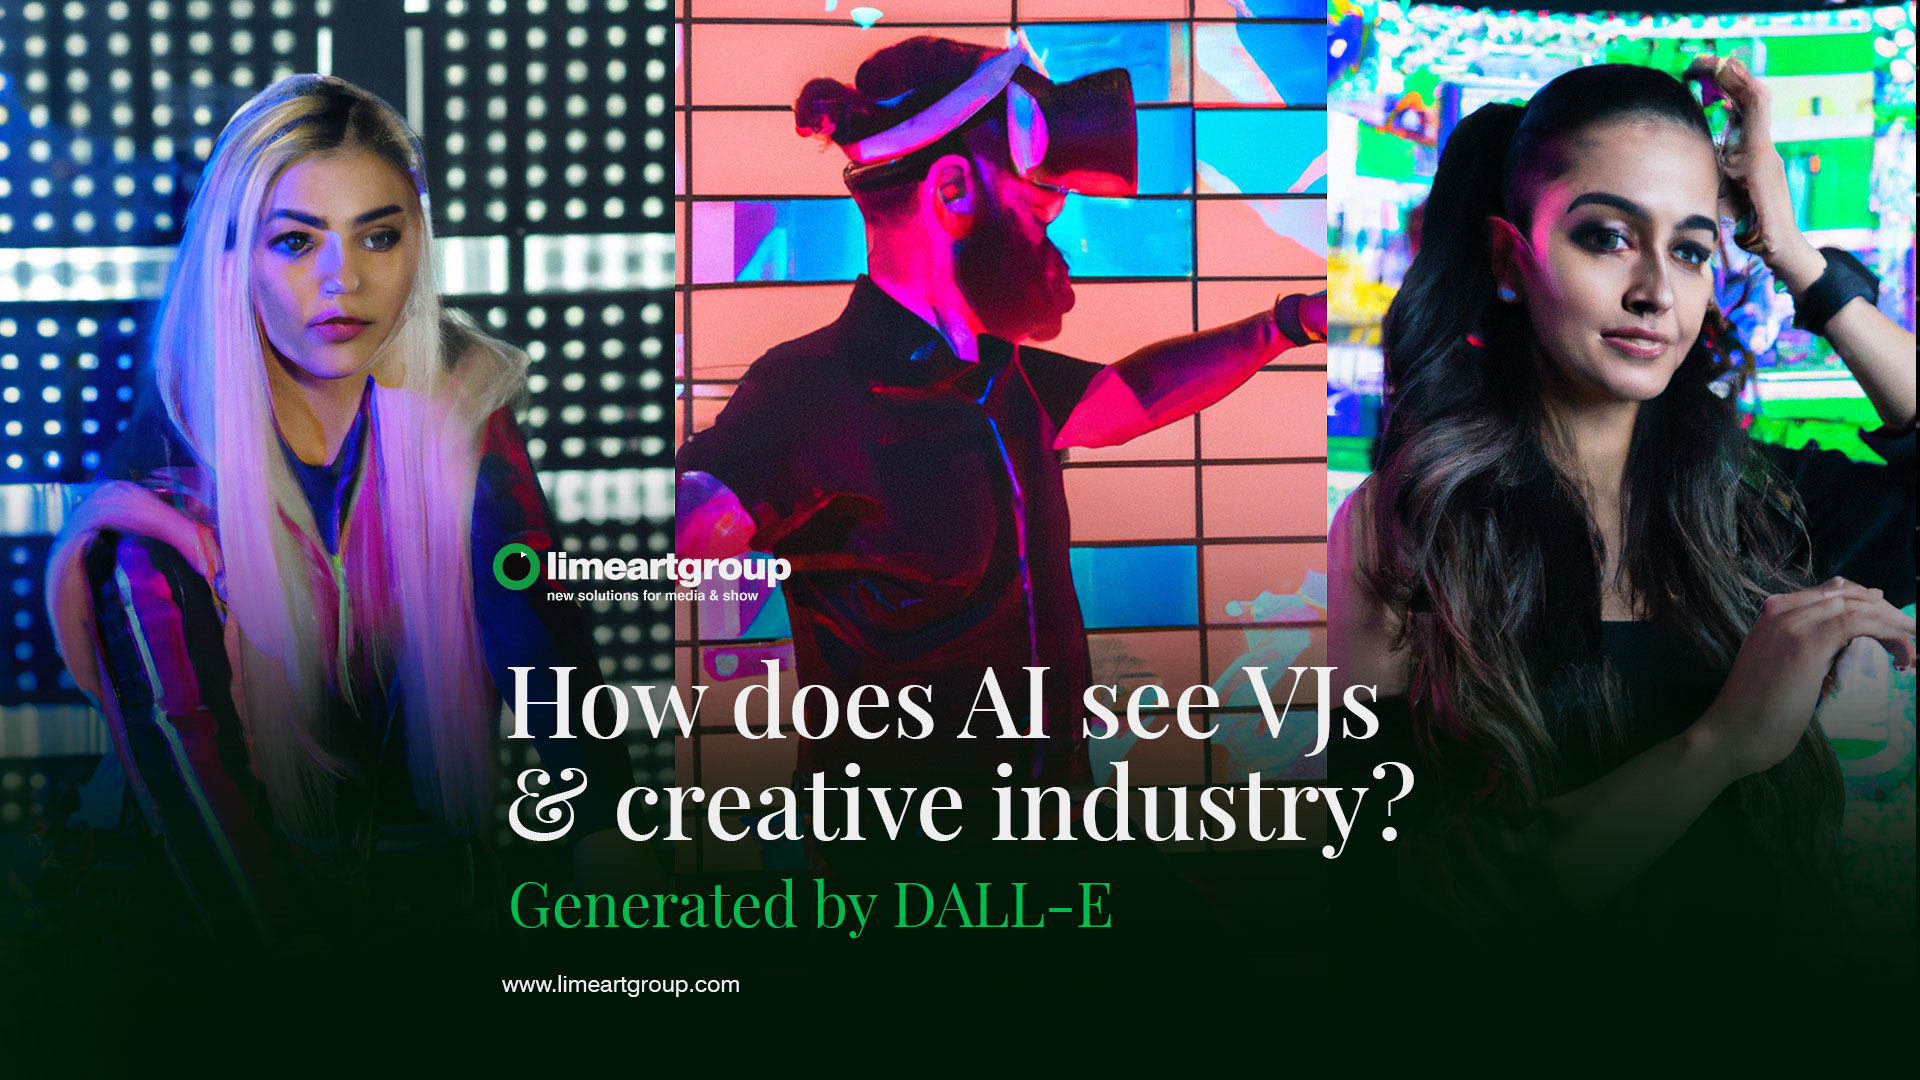 How does artificial intelligence (AI) see VJs and the entire creative industry?